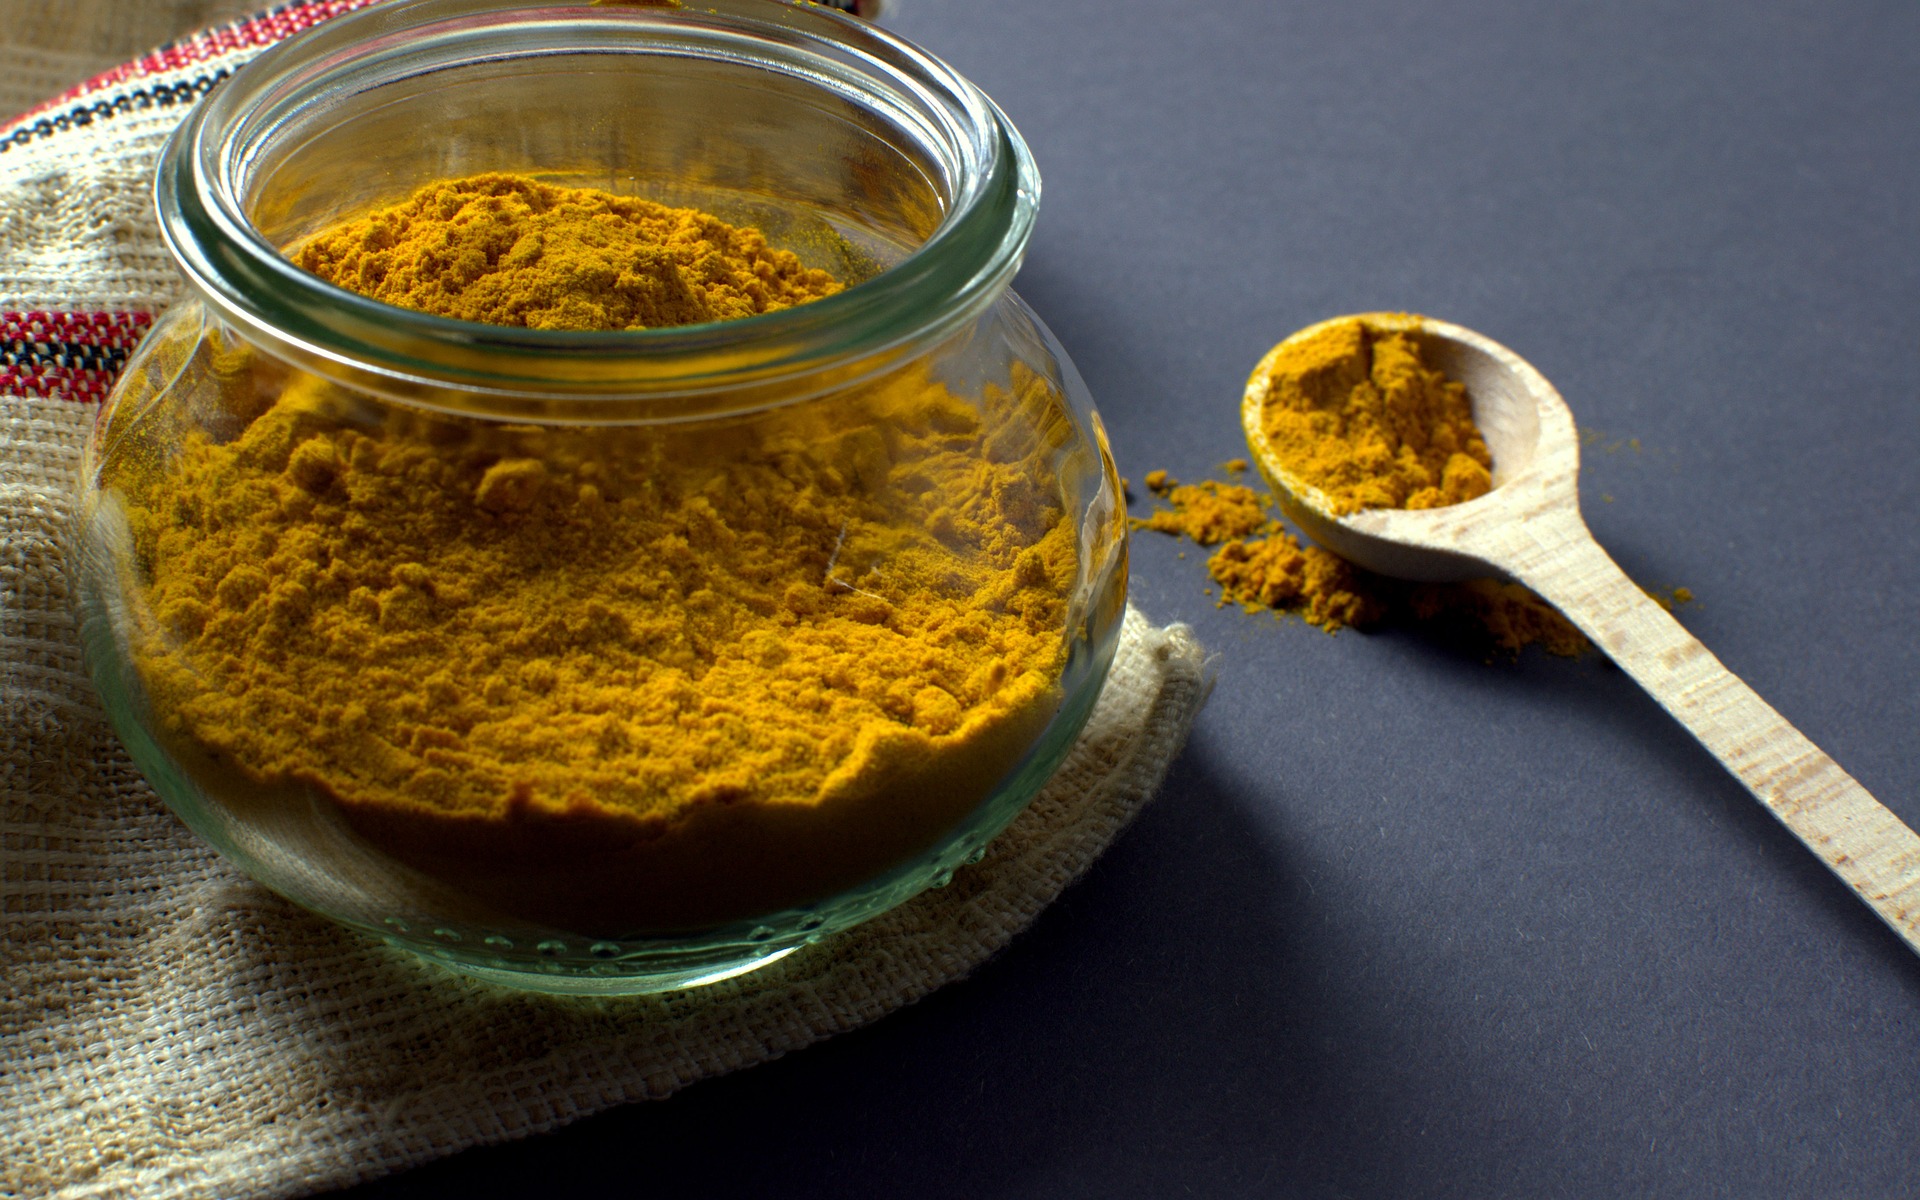 Turmeric may help to fight cancer